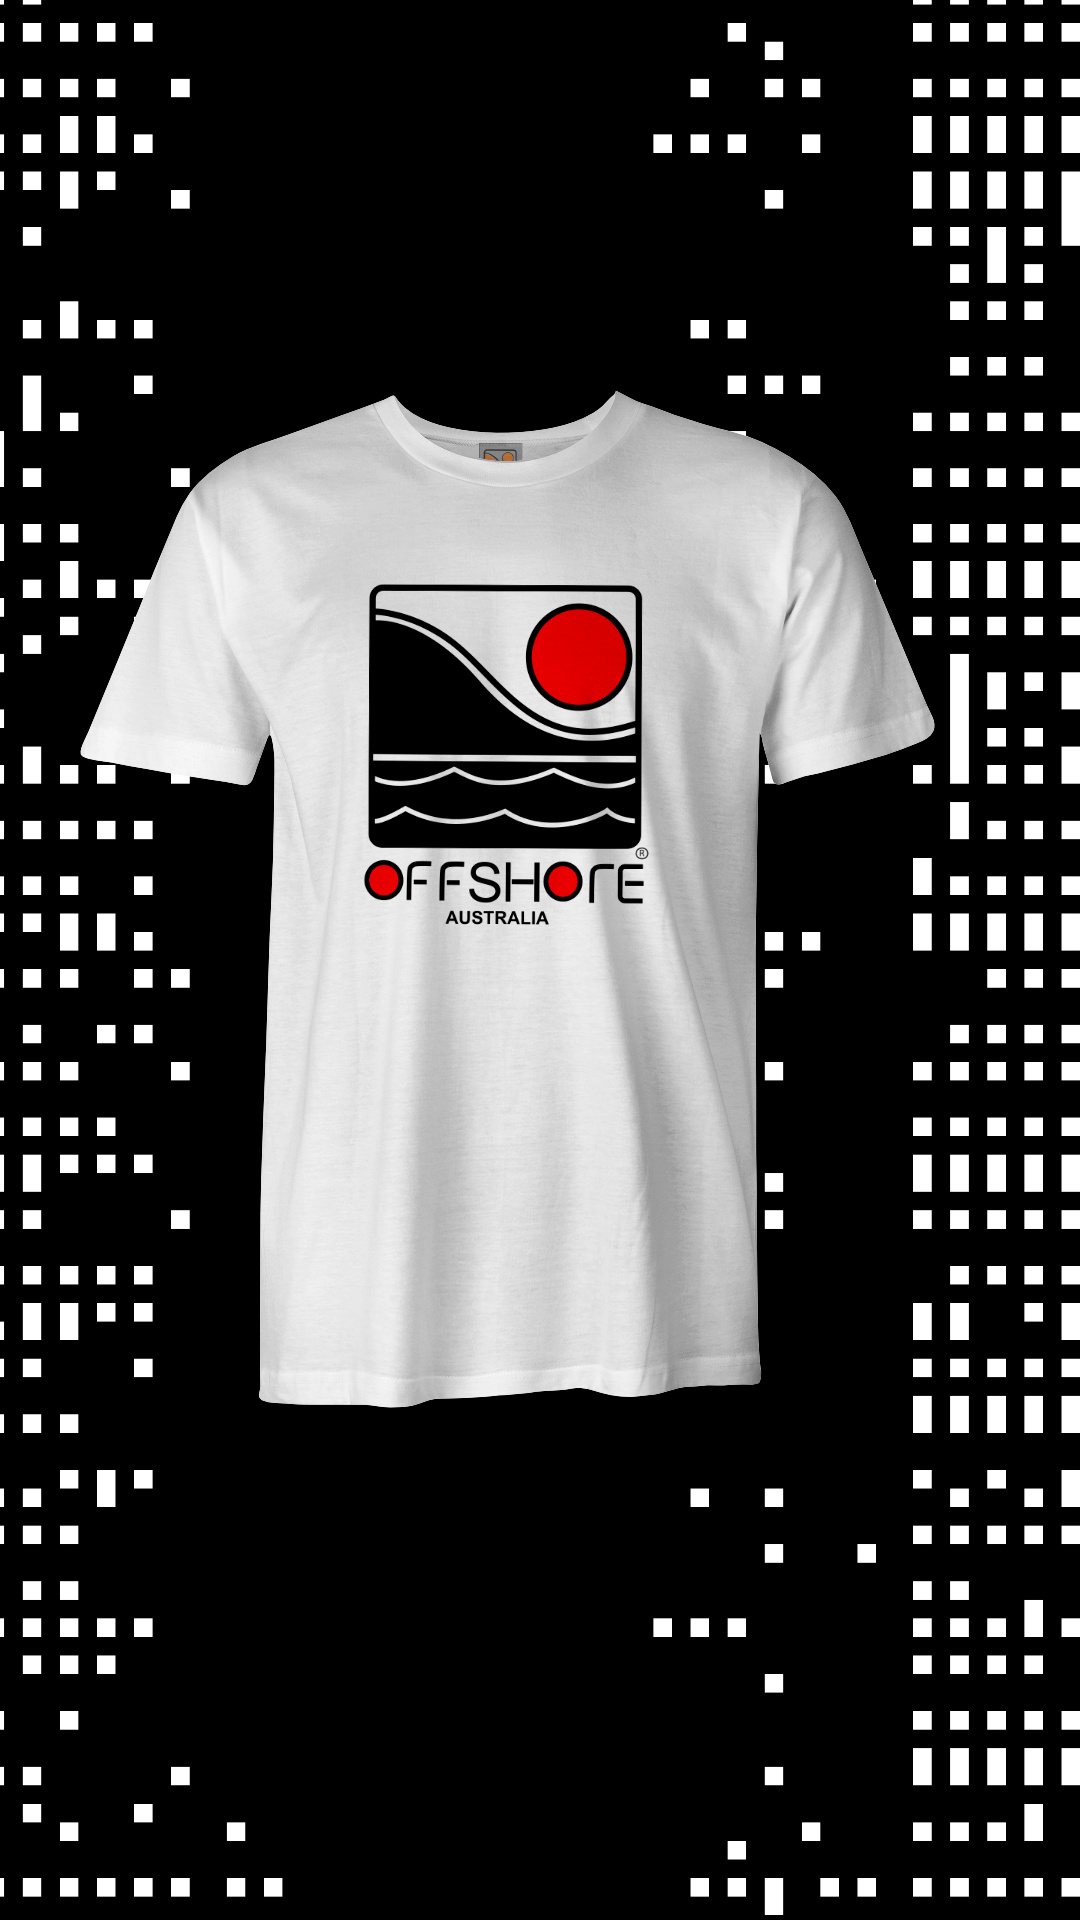 Offshore T shirt Print on Front